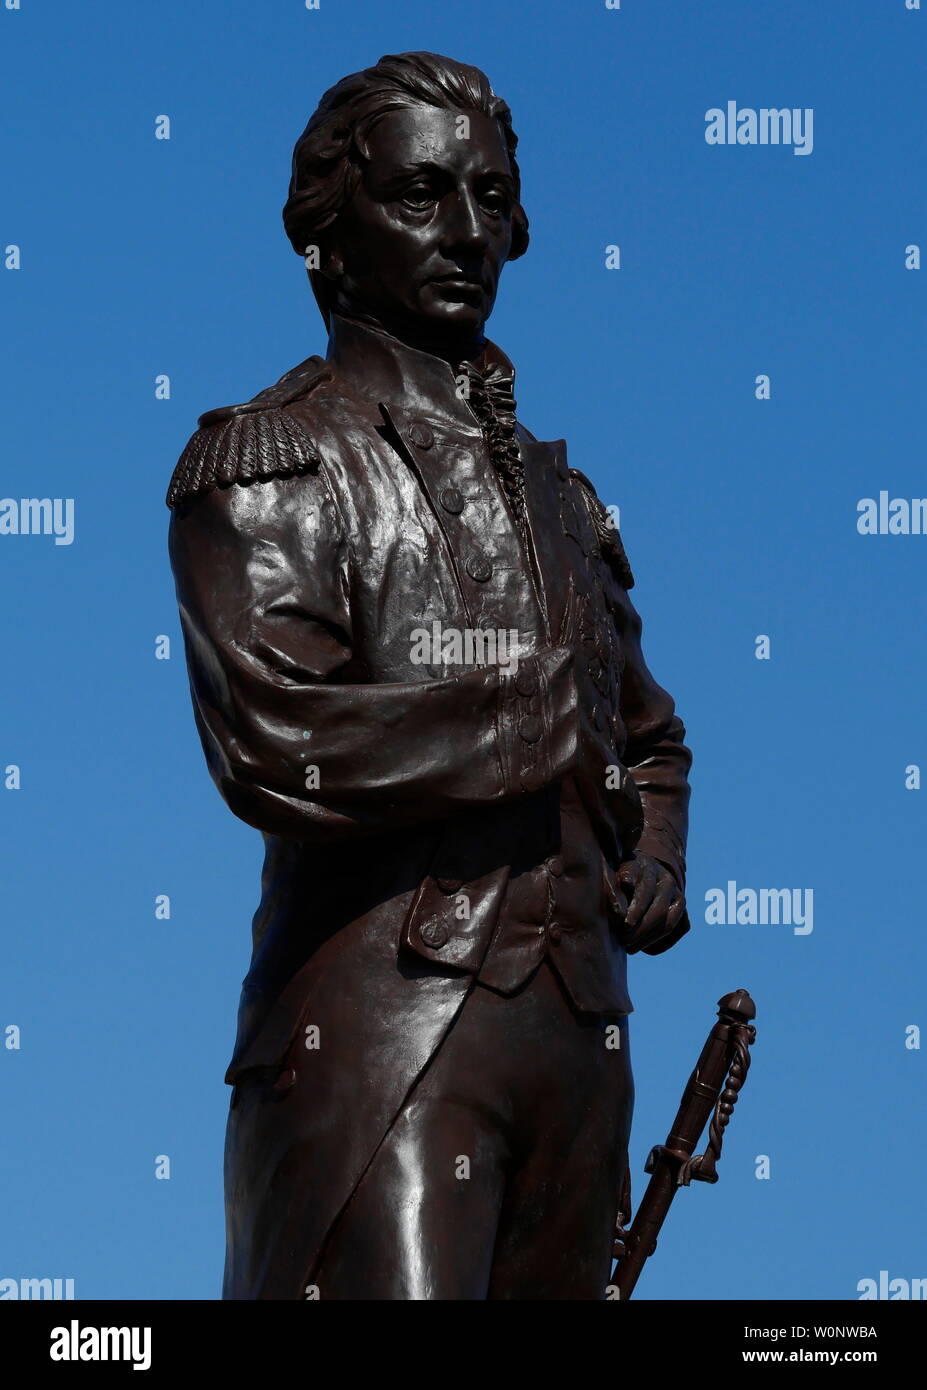 AJAXNETPHOTO. 3RD JUNE, 2019. SOUTHSEA, ENGLAND. - TRAFALGAR HERO - BRONZE STATUE OF BATTLE OF TRAFALGAR COMMANDER ADMIRAL HORATIO NELSON NEAR GRAND PARADE, OLD PORTSMOUTH. STATUE WAS CENTRE OF A DISPUTE BETWEEN PORTSMOUTH COUNCIL AND PROTESTORS AGAINST MOVING IT FROM ITS ORIGINAL LOCATION NEAR SOUTHSEA COMMON CLOSER TO THE SEA. PHOTO:JONATHAN EASTLAND/AJAX REF:GX8 190306 370 Stock Photo